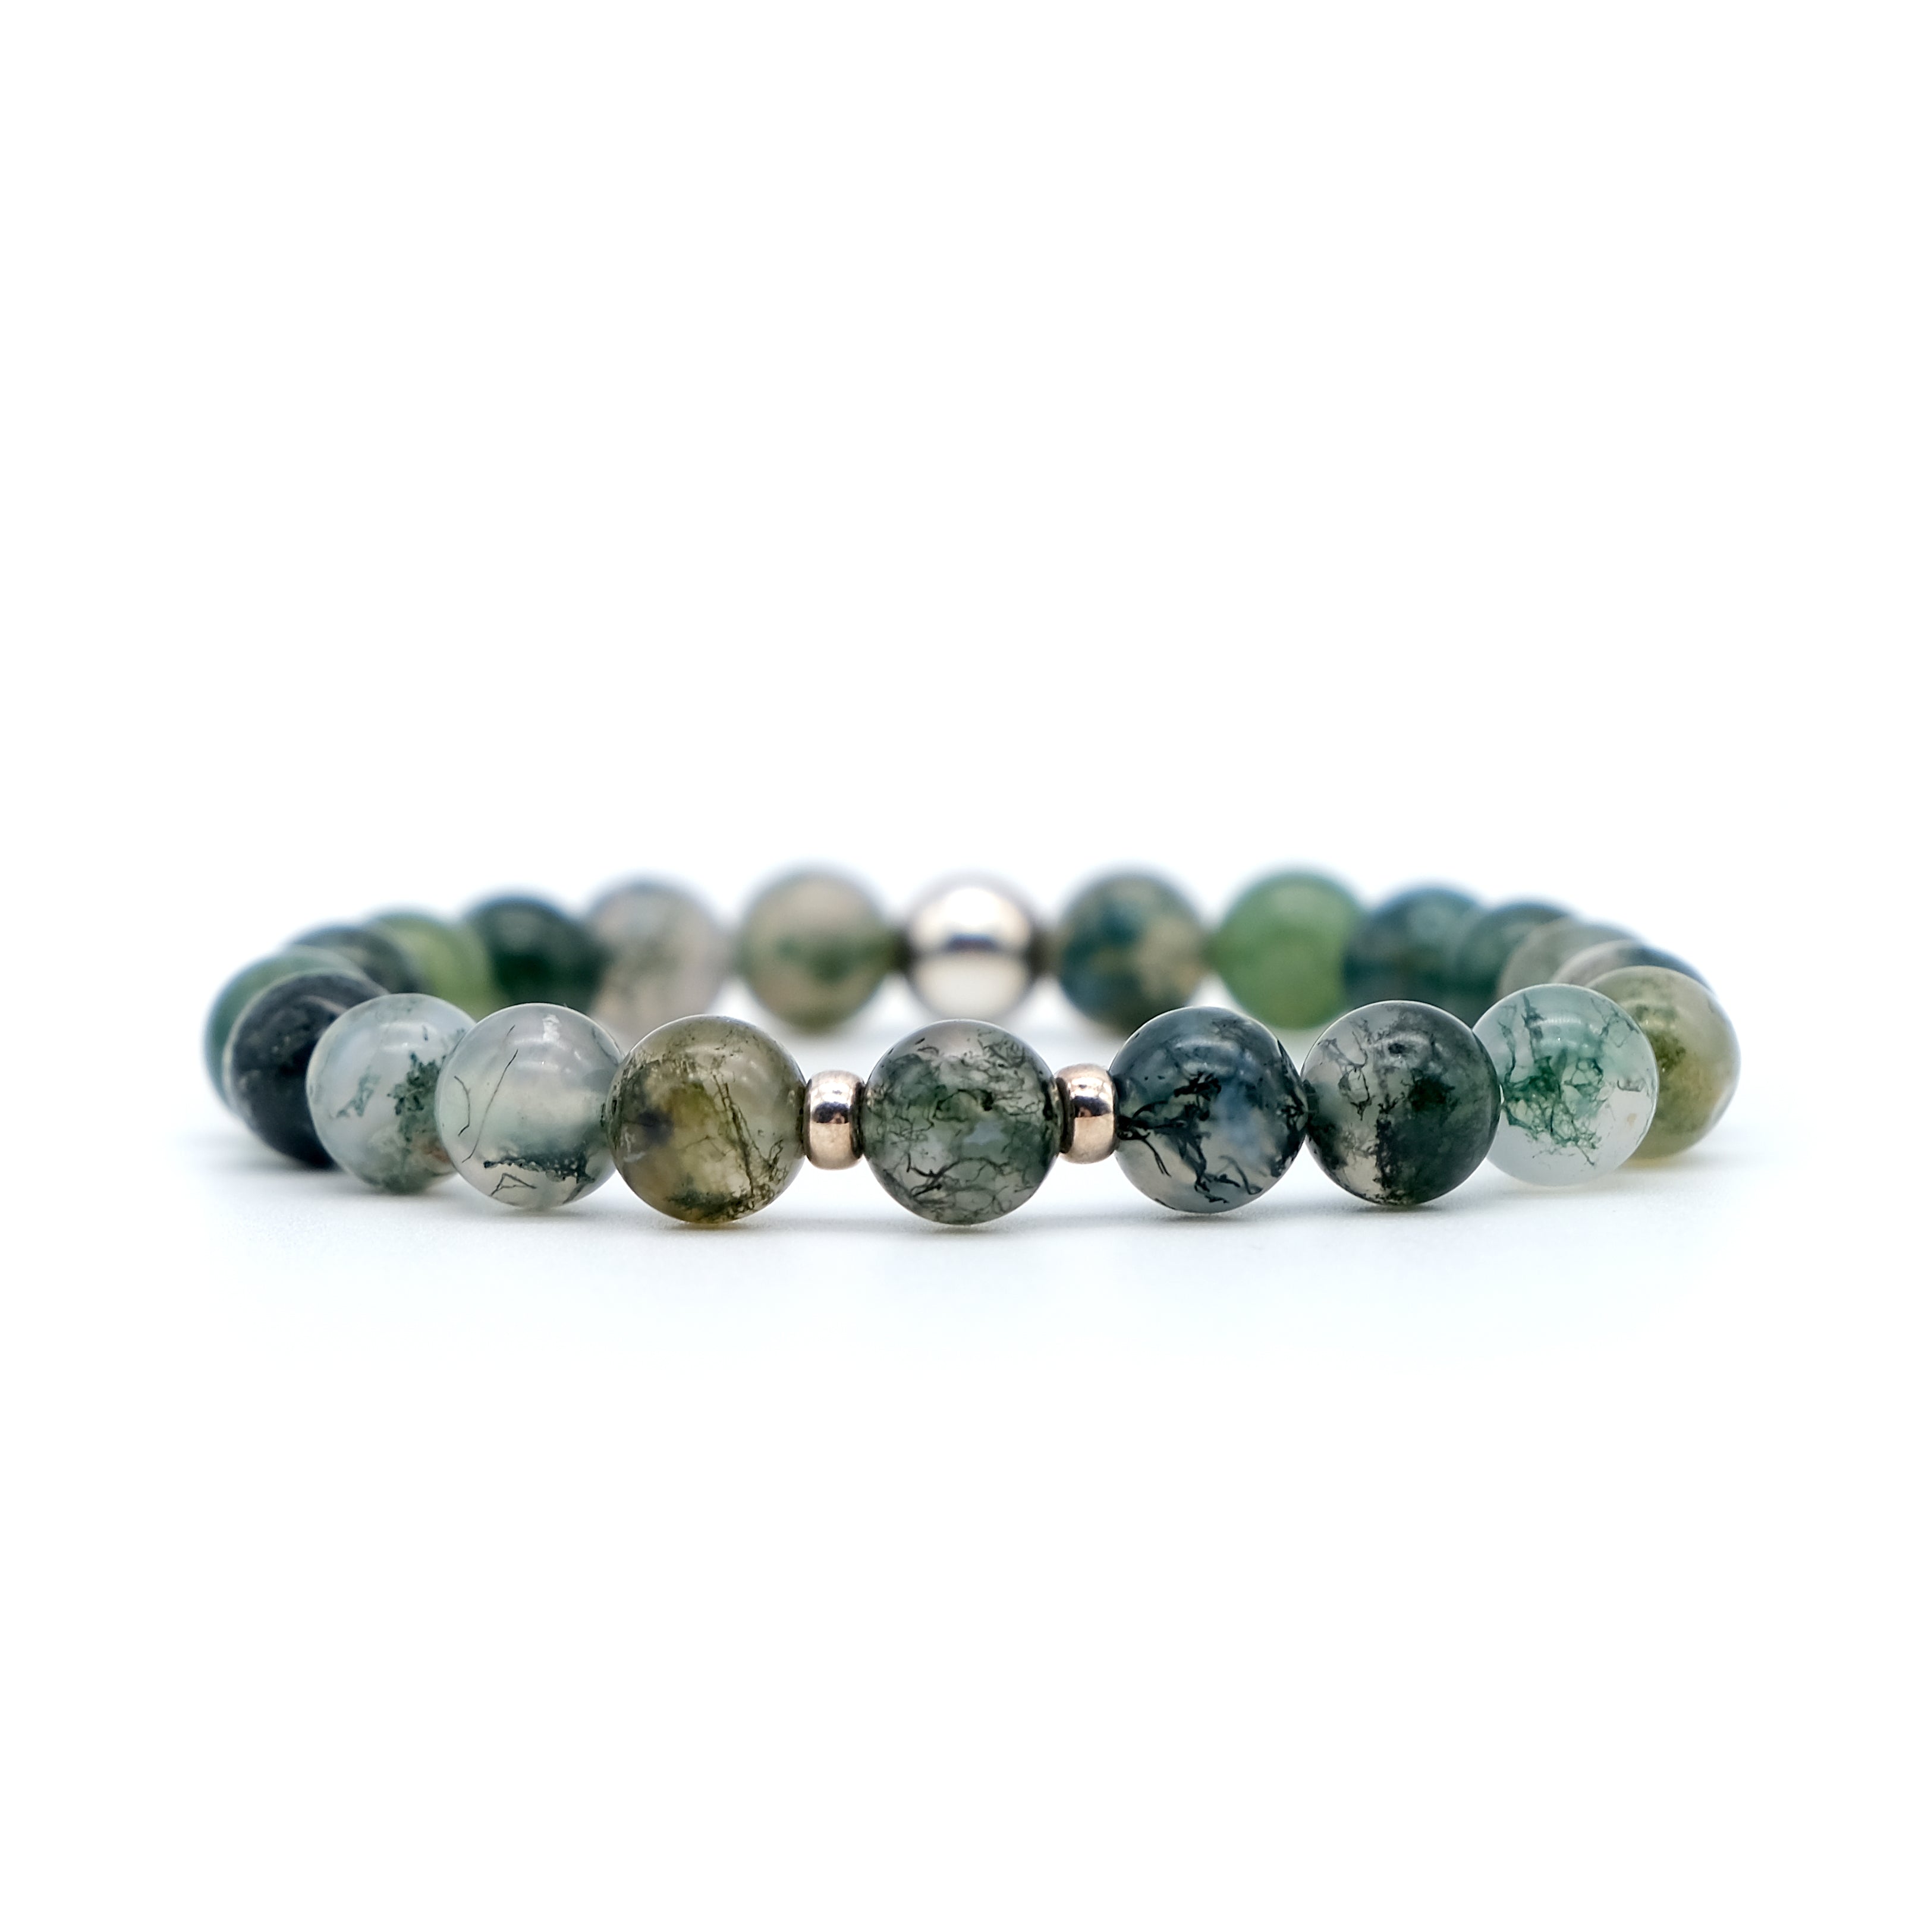 8mm Moss Agate Bracelet with 925 Silver accessories